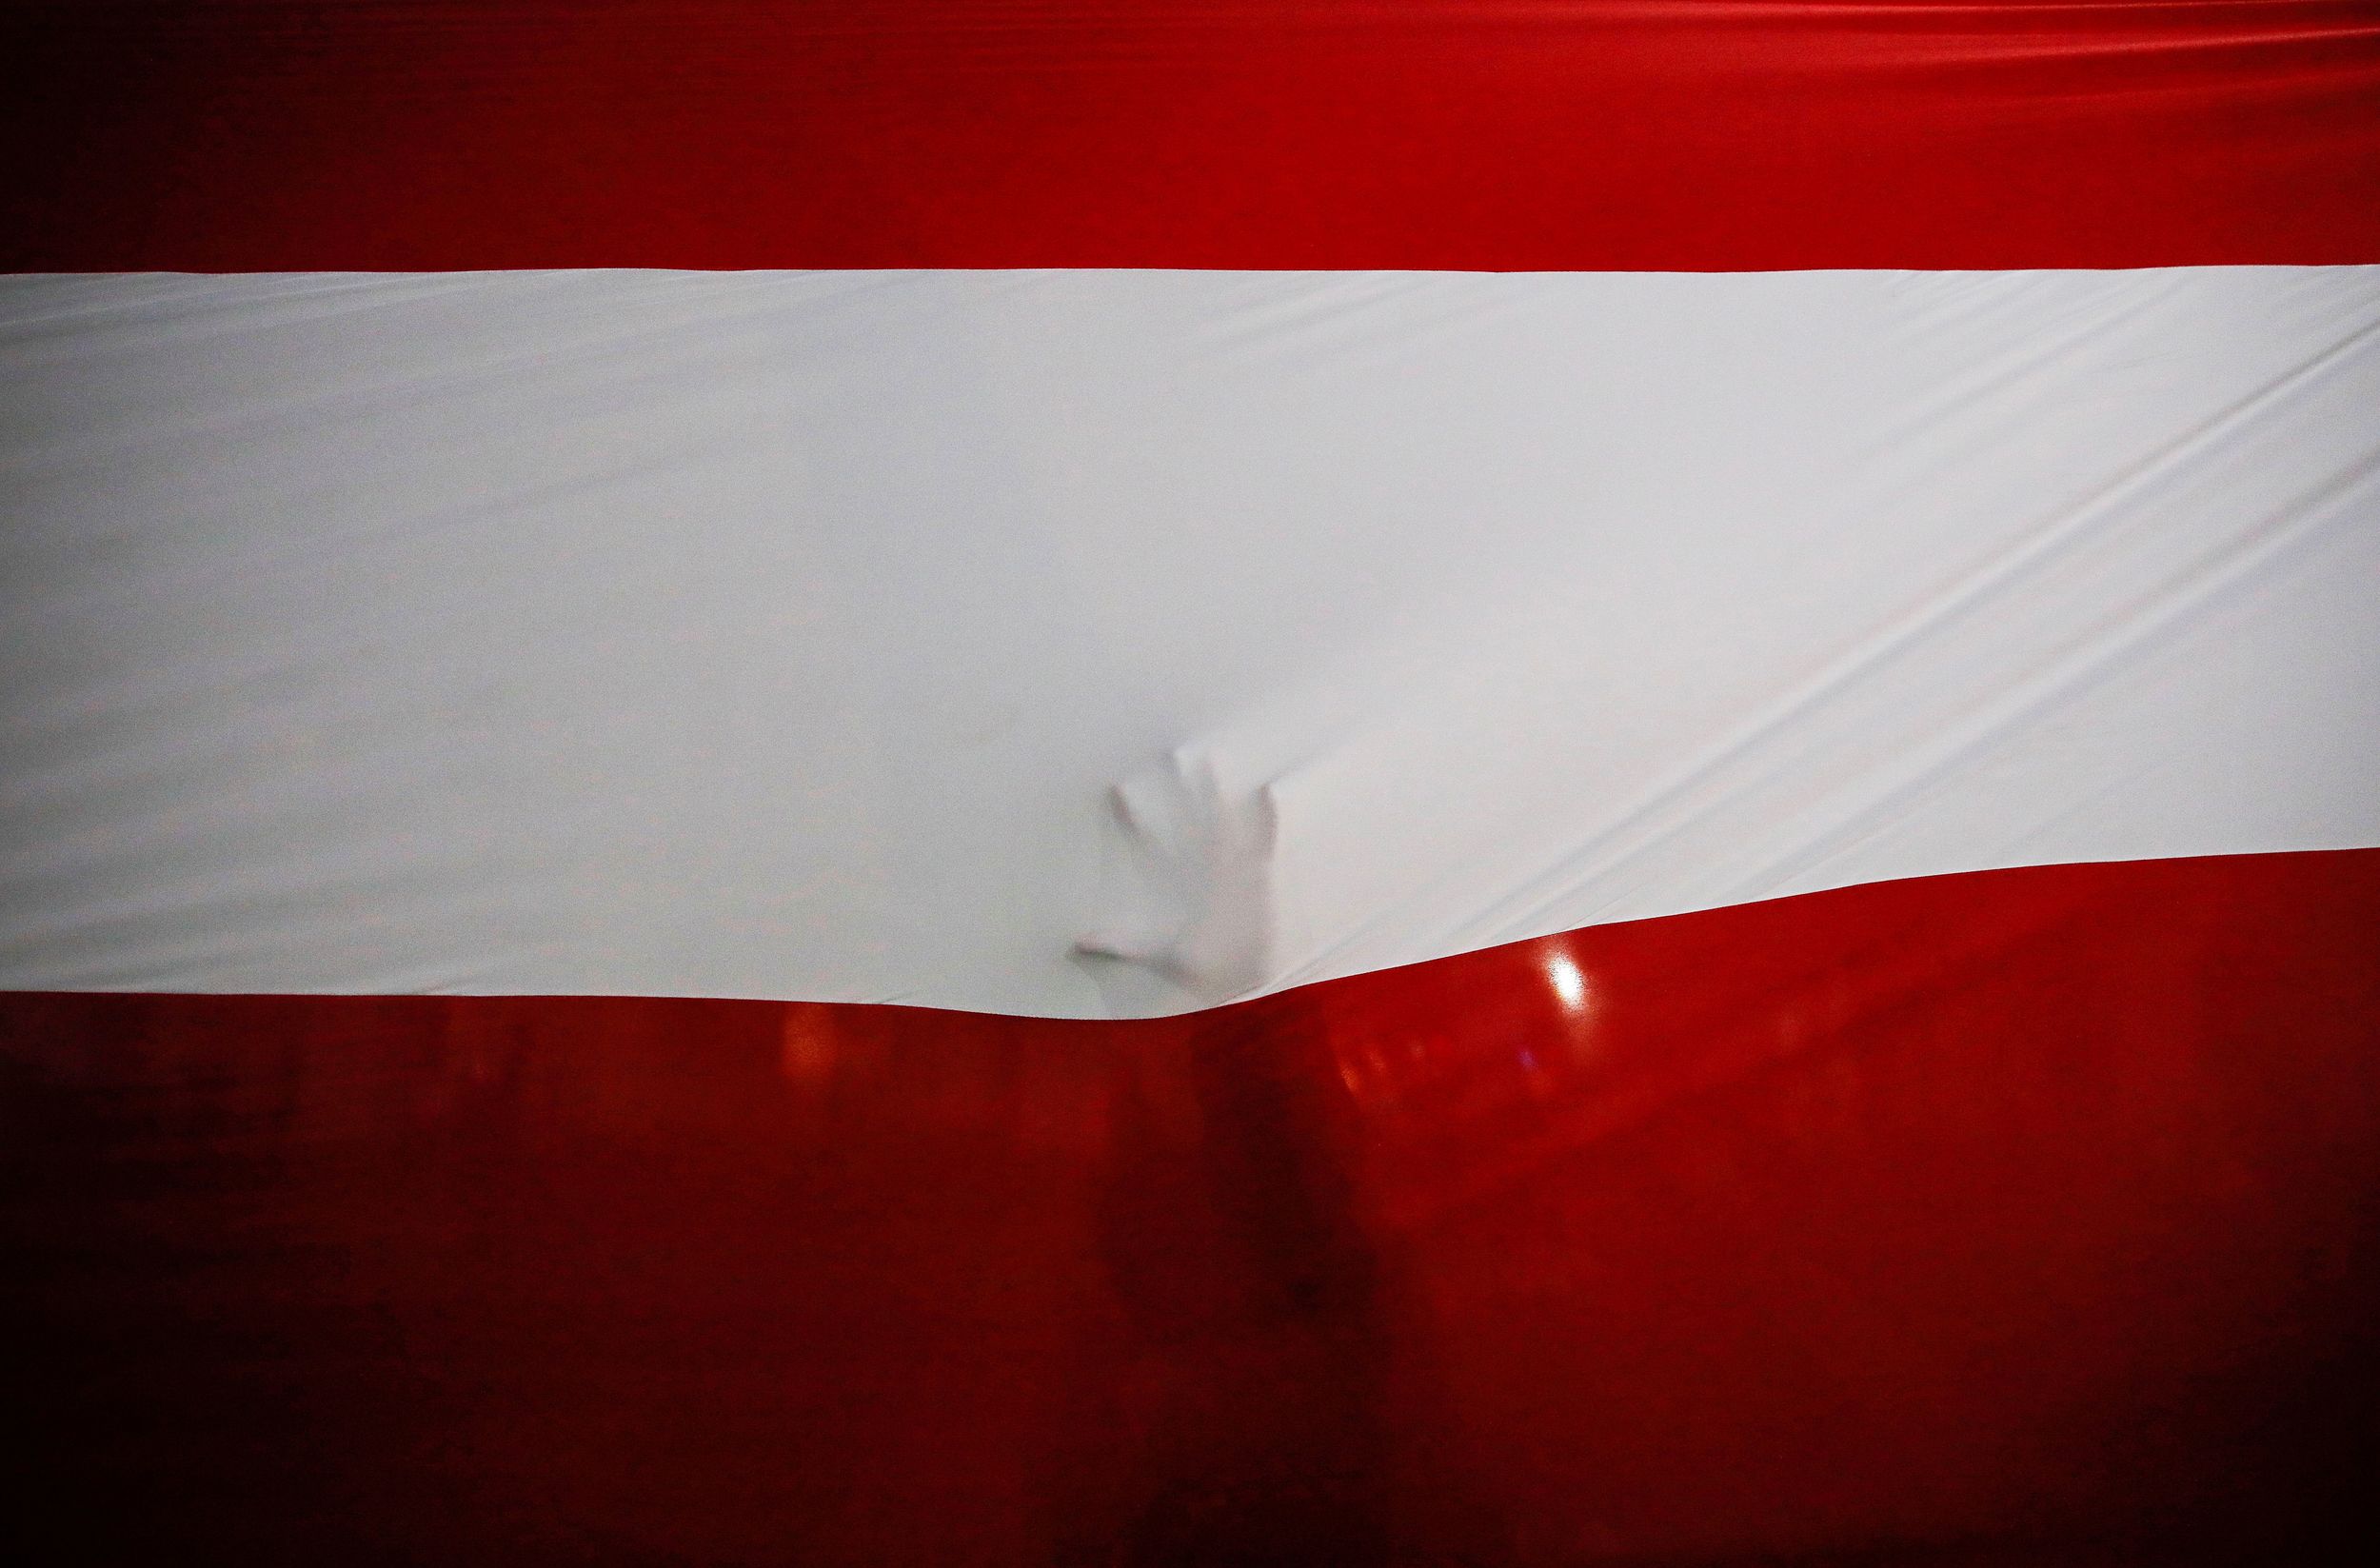 A person touches Peru's national flag after Francisco Sagasti from the Centrist Morado Party was elected Peru's interim president by Congress, in Lima